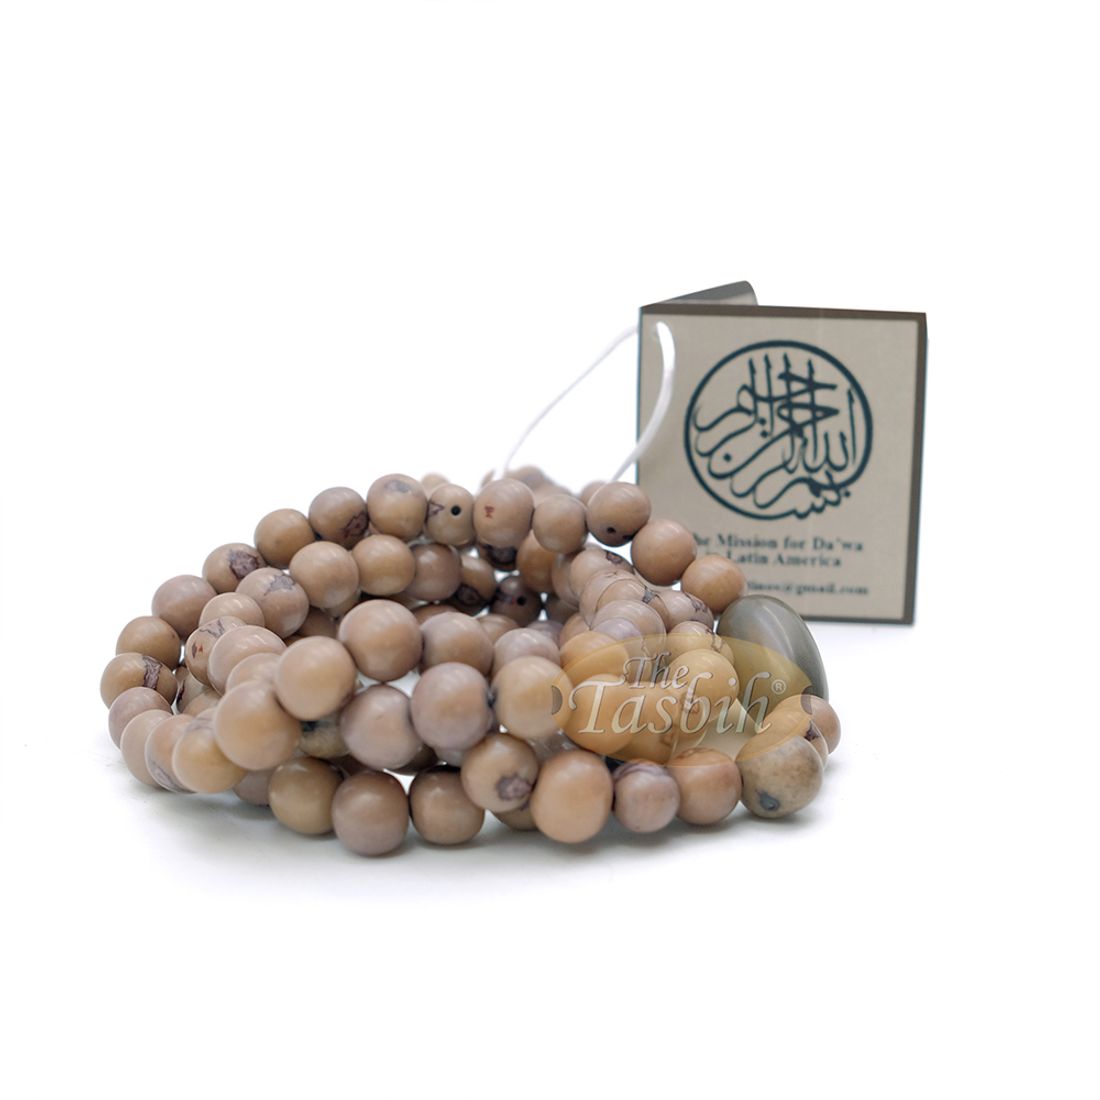 Grey Natural Colored Dye Eco-friendly Sustainable Original Açai Seed 9mm Beads Traditional Tasbih